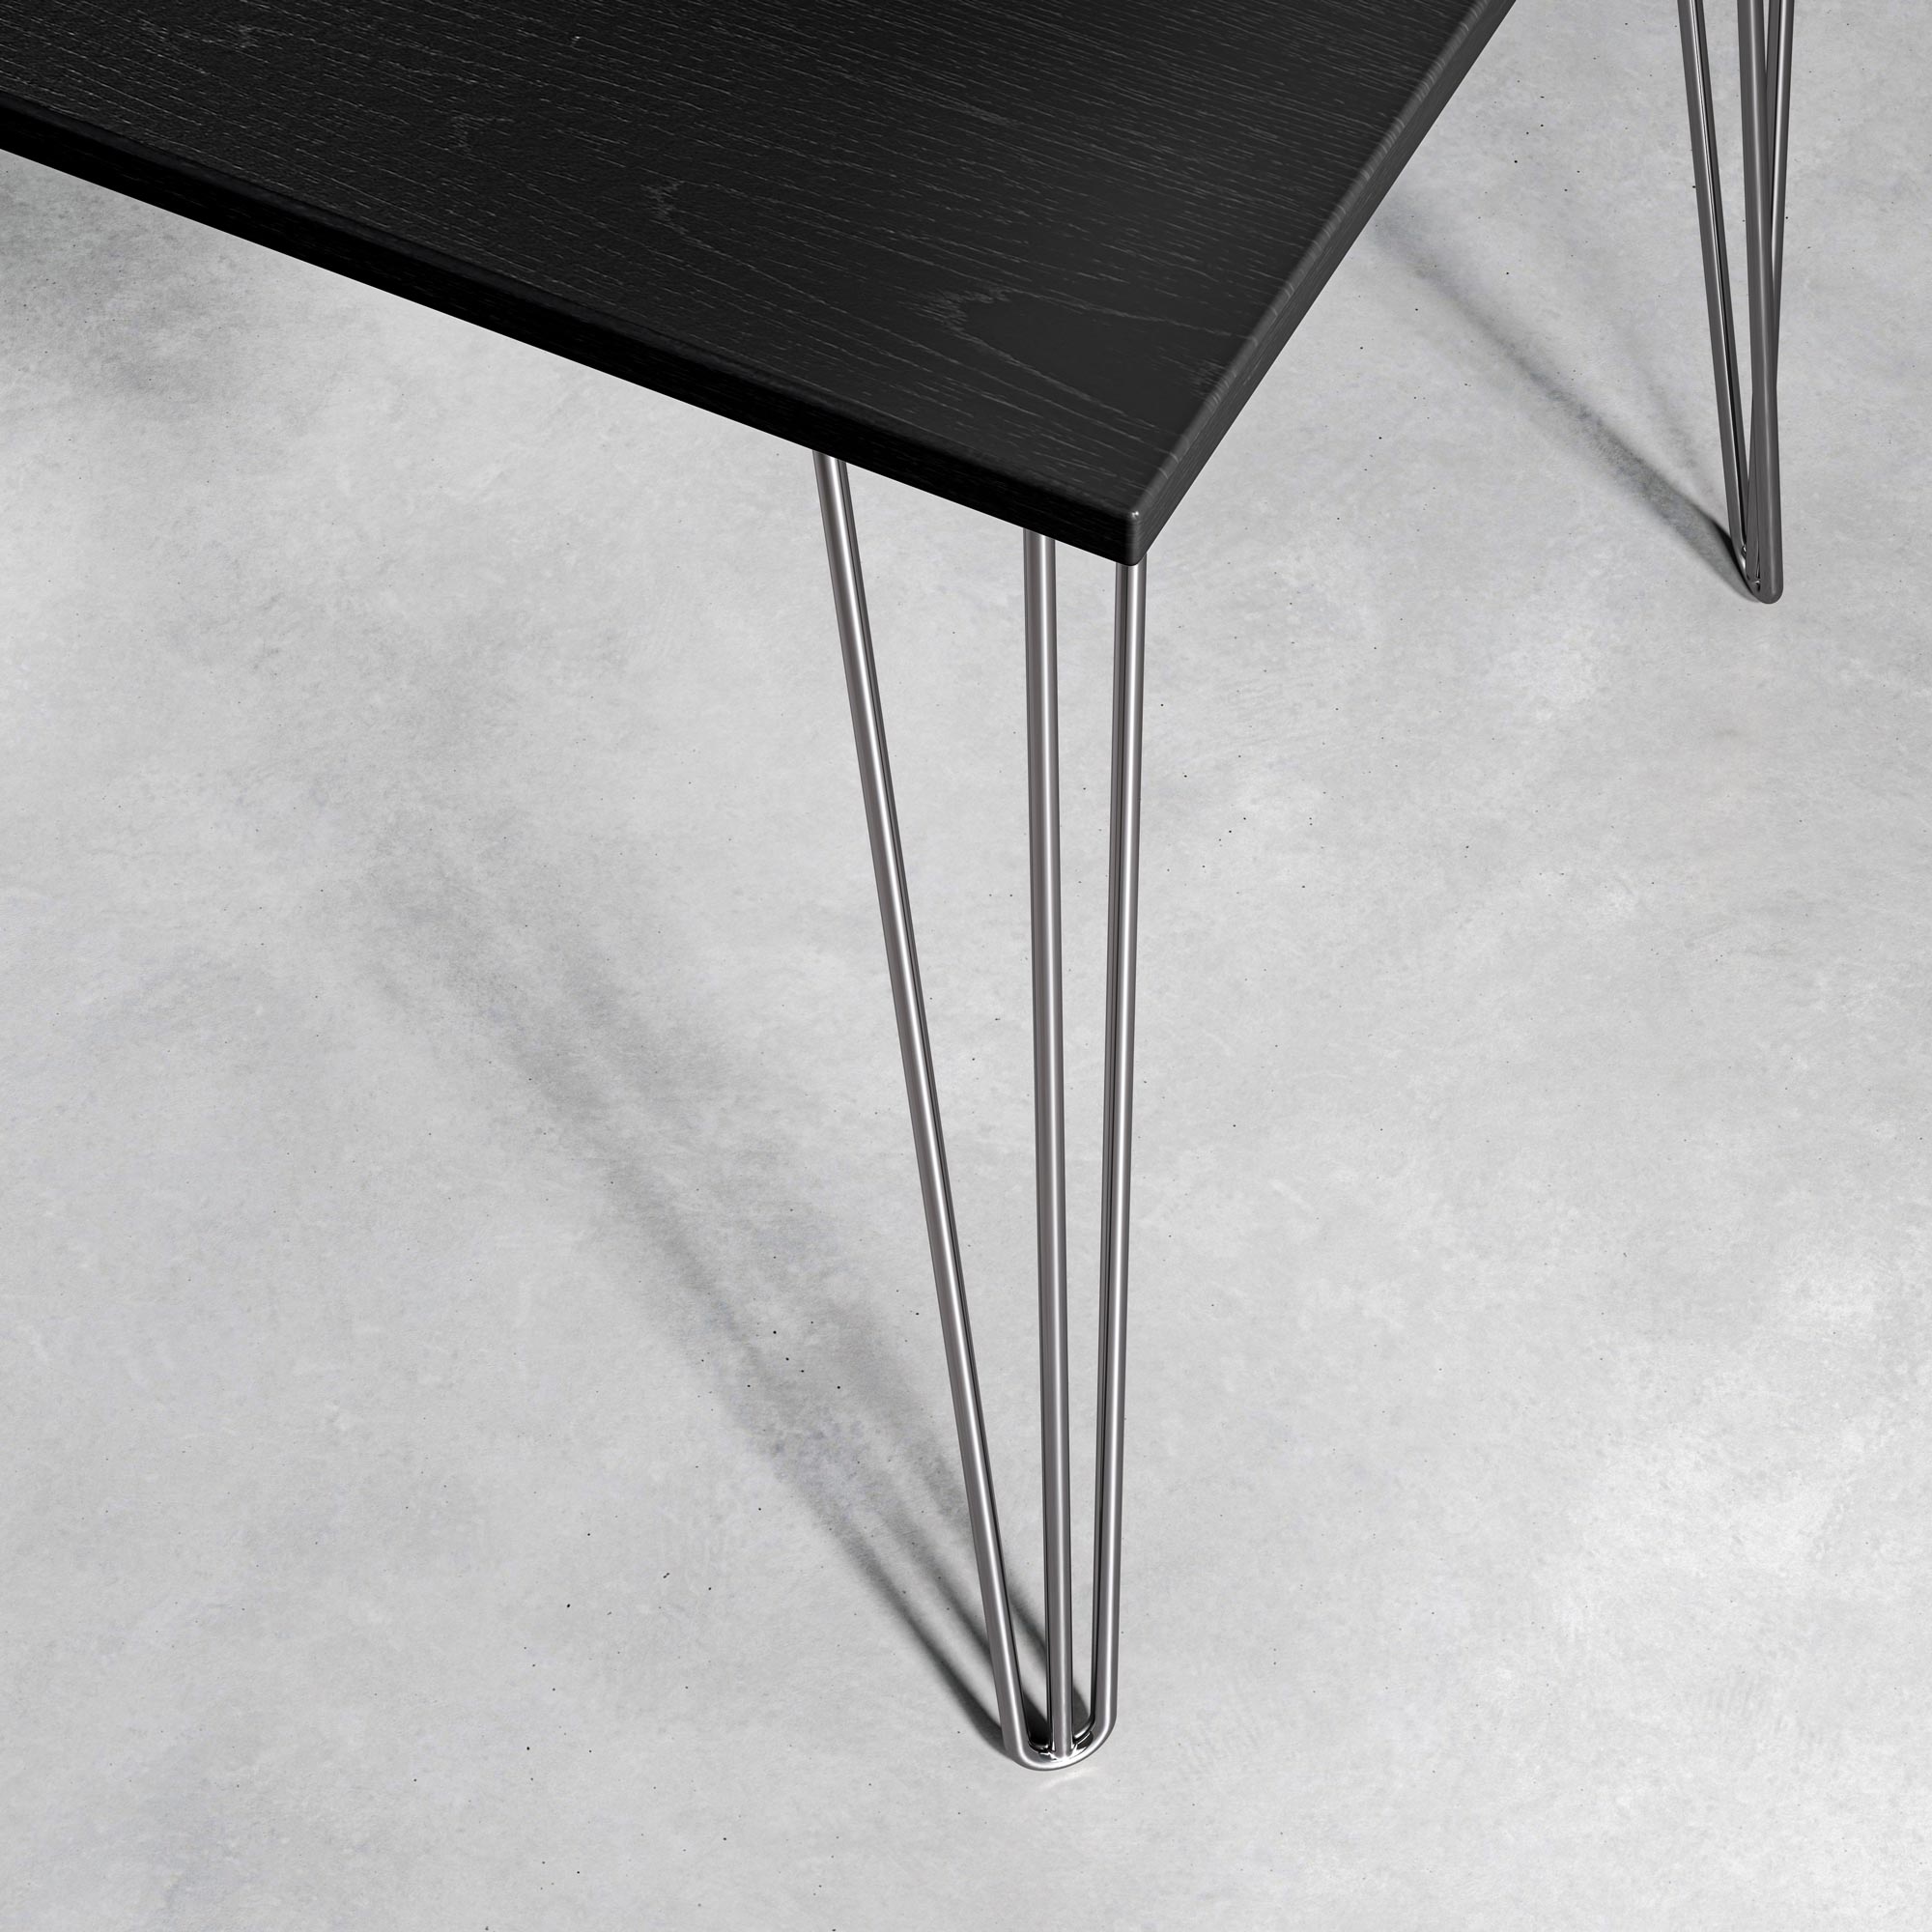 Black Ash Hairpin Table-Large (75cm x 150cm)-Clear Coat-The Hairpin Leg Co.